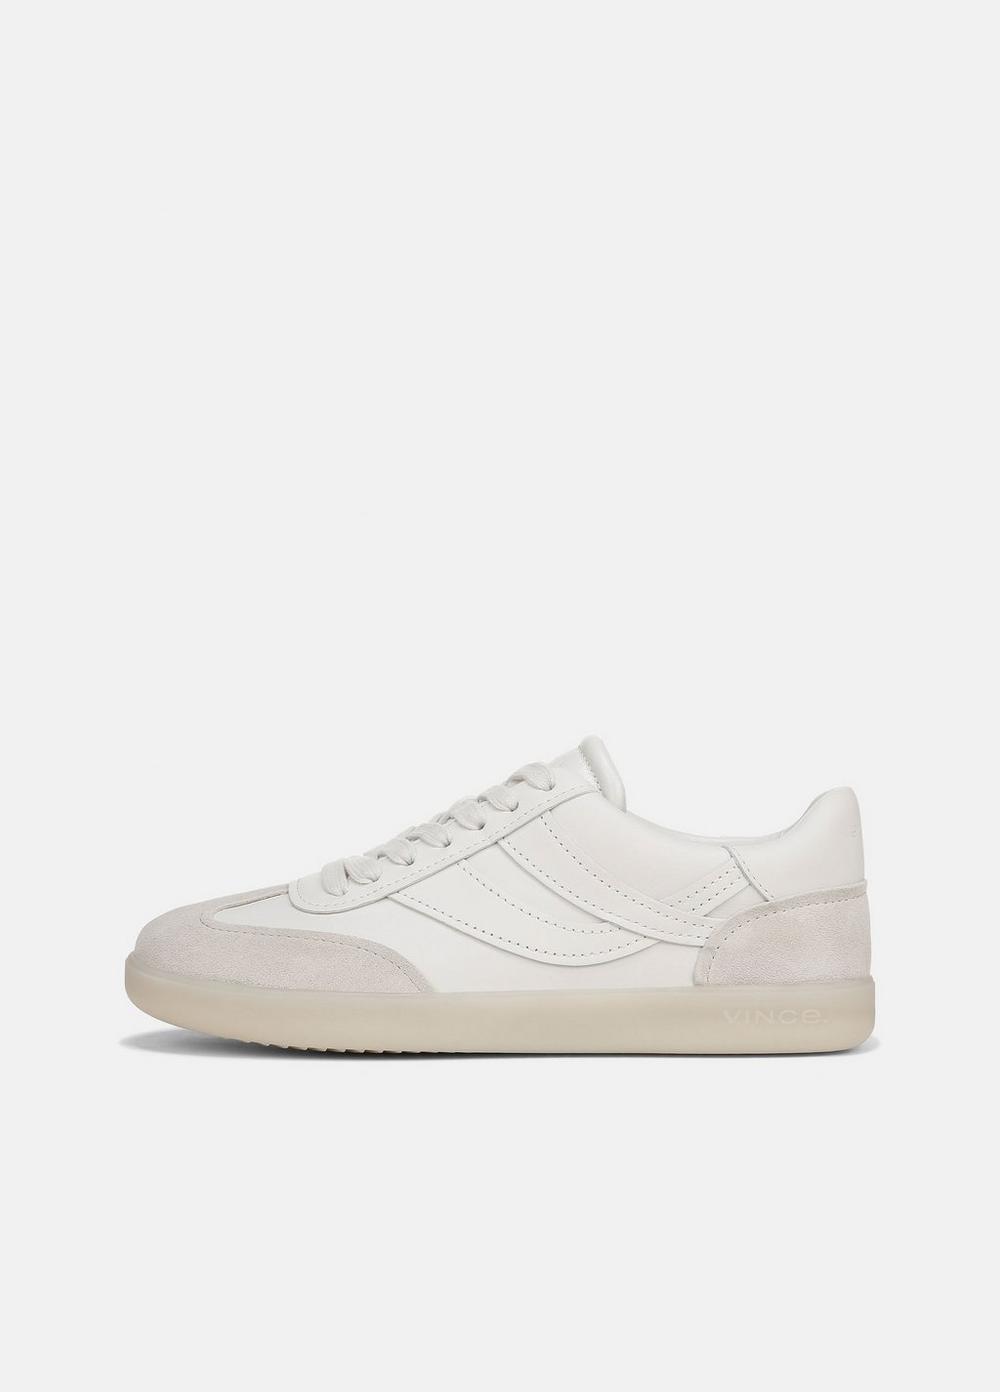 Oasis Leather And Suede Sneaker, Chalk White, Size 8.5 Vince